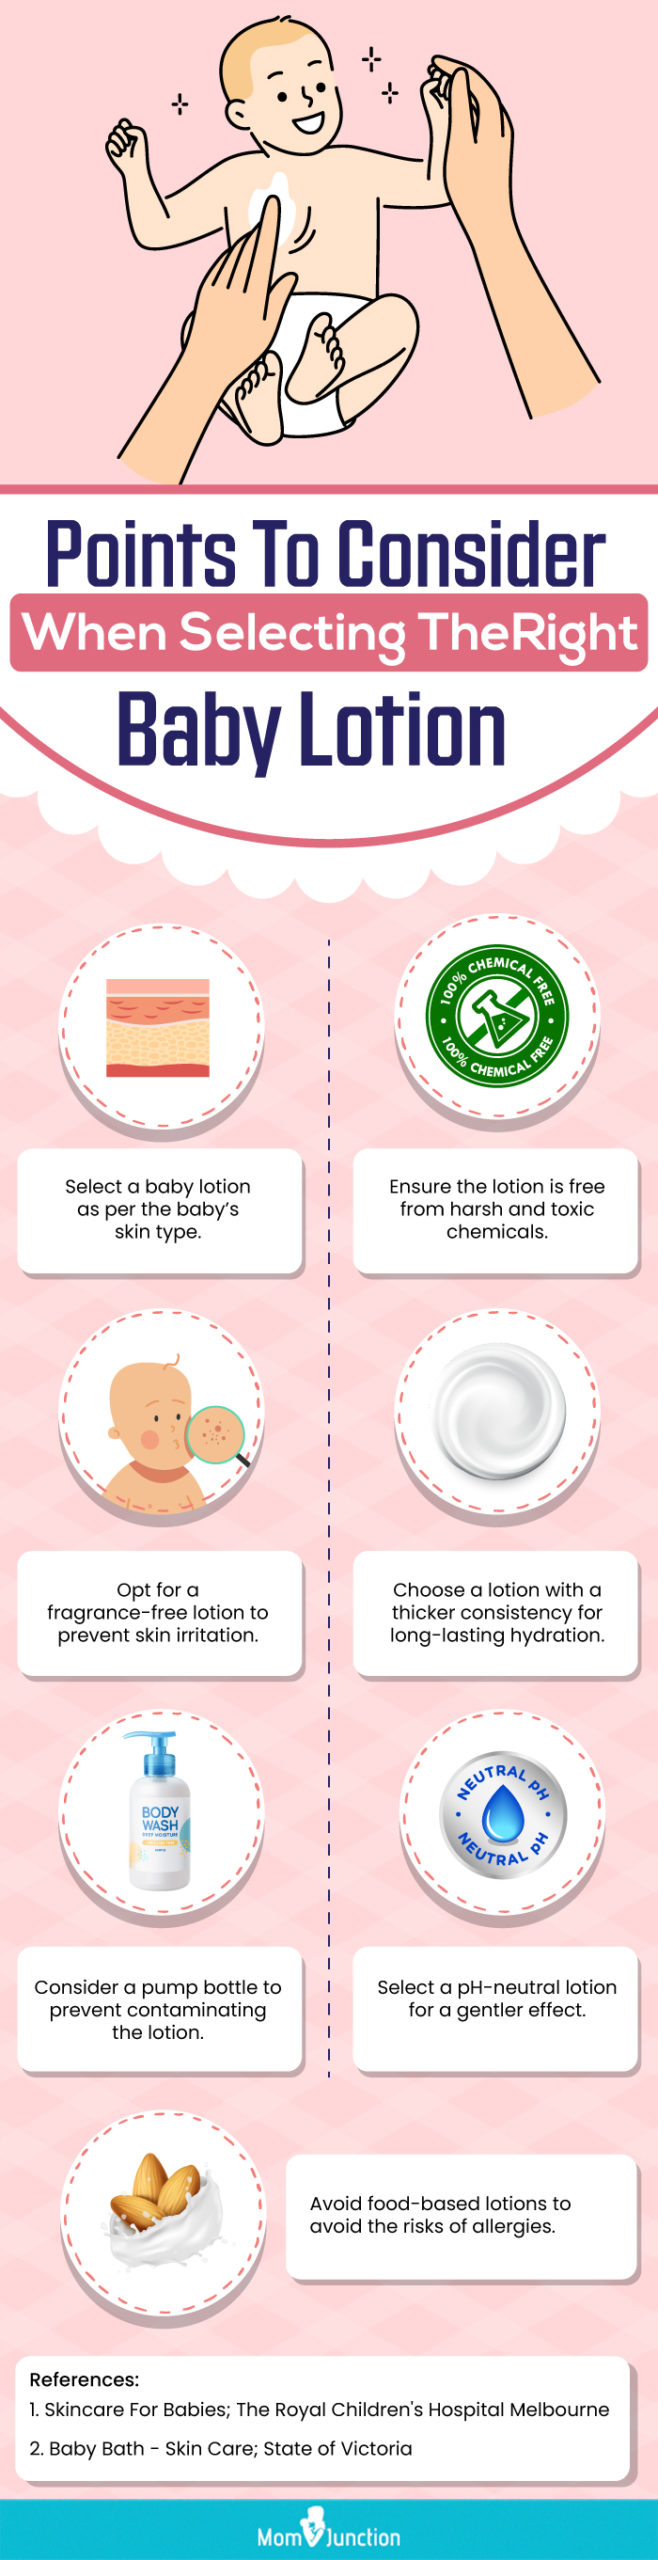 Points To Consider When Selecting The Right Baby Lotion (infographic)